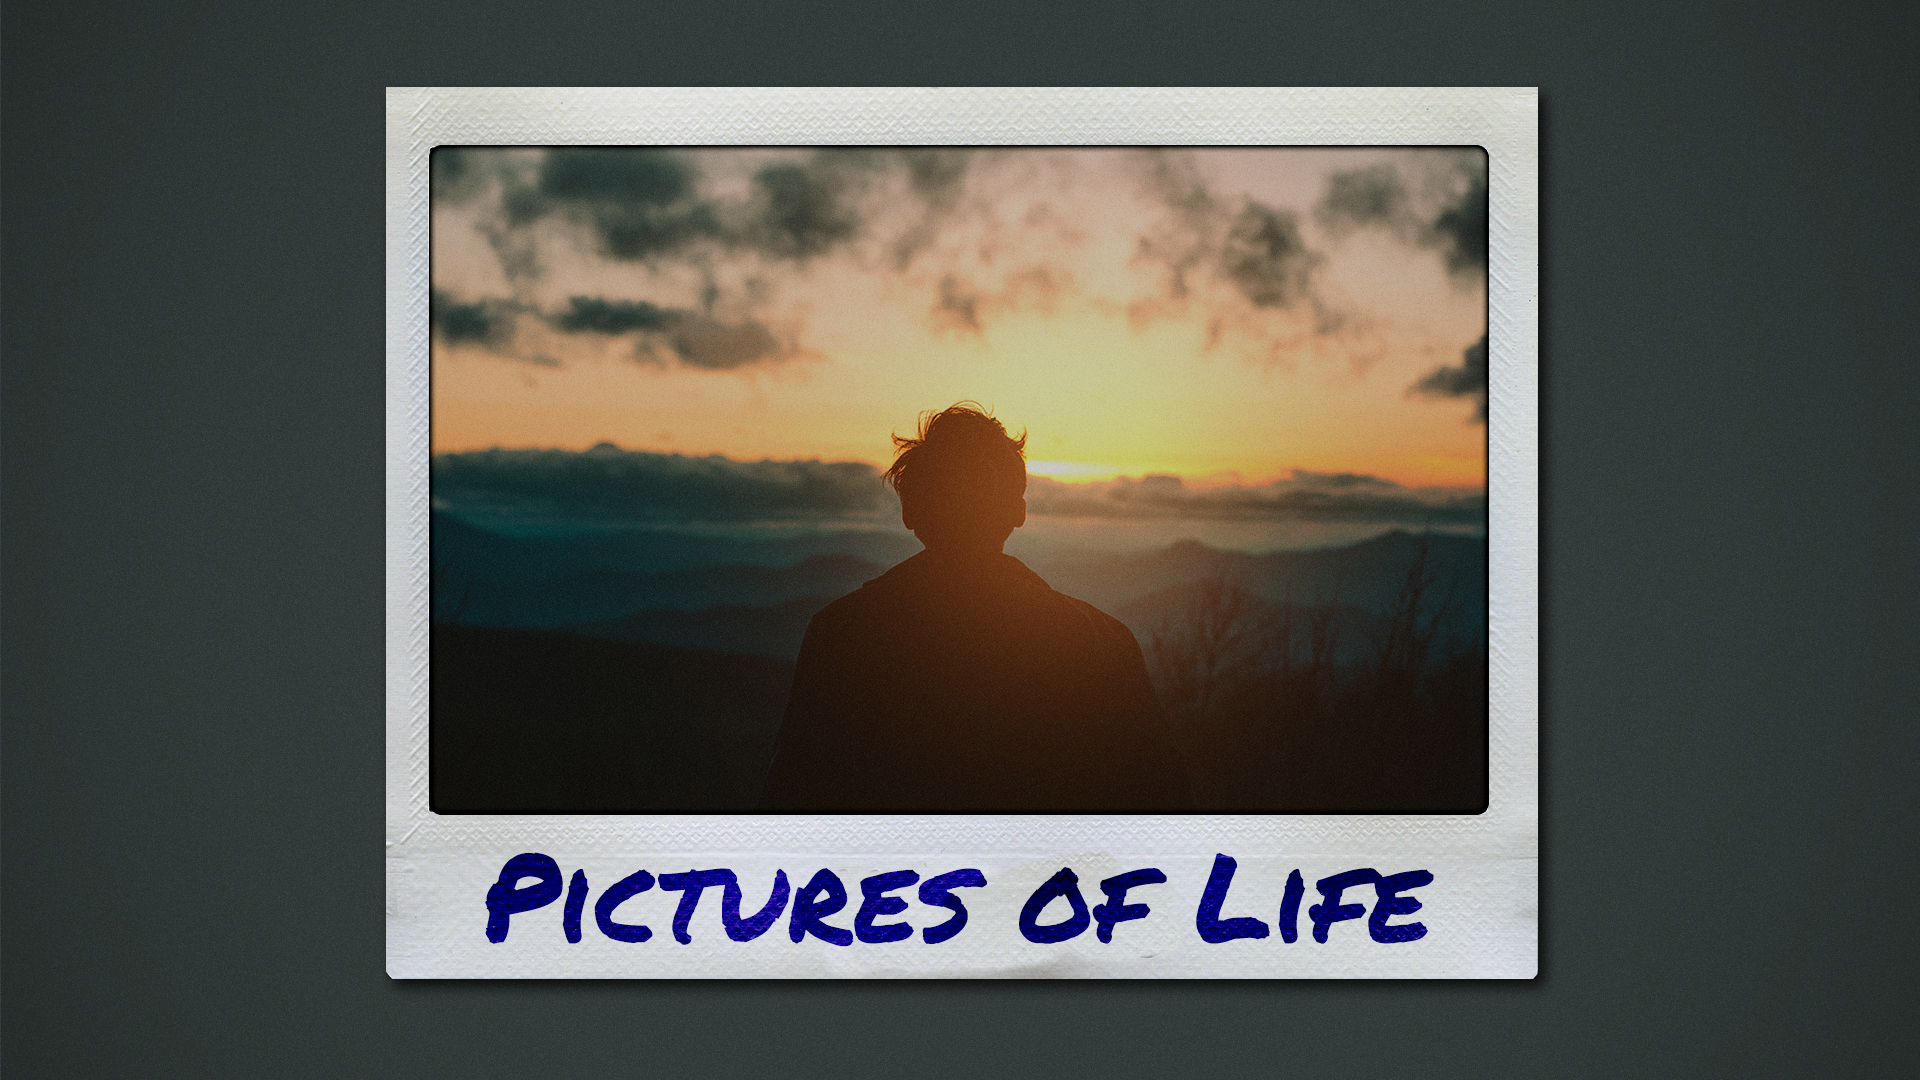 Pictures of Life